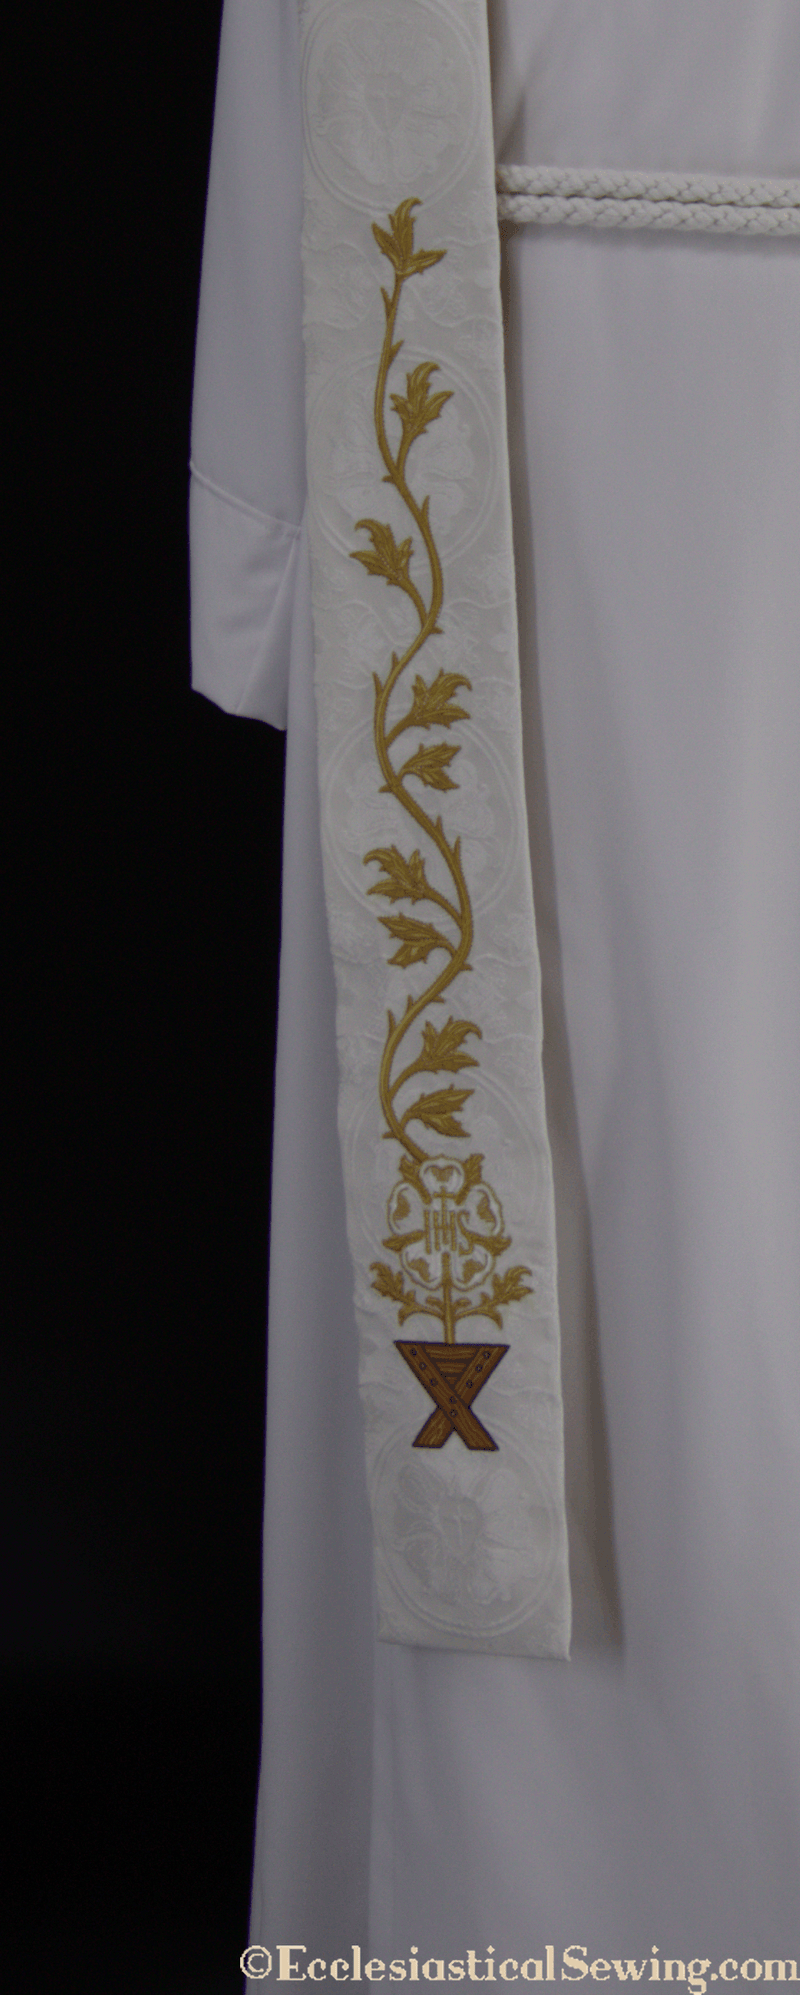 files/white-clergy-stoles-or-christmas-rose-easter-collection-style-3-ecclesiastical-sewing-6-31790303543552.png